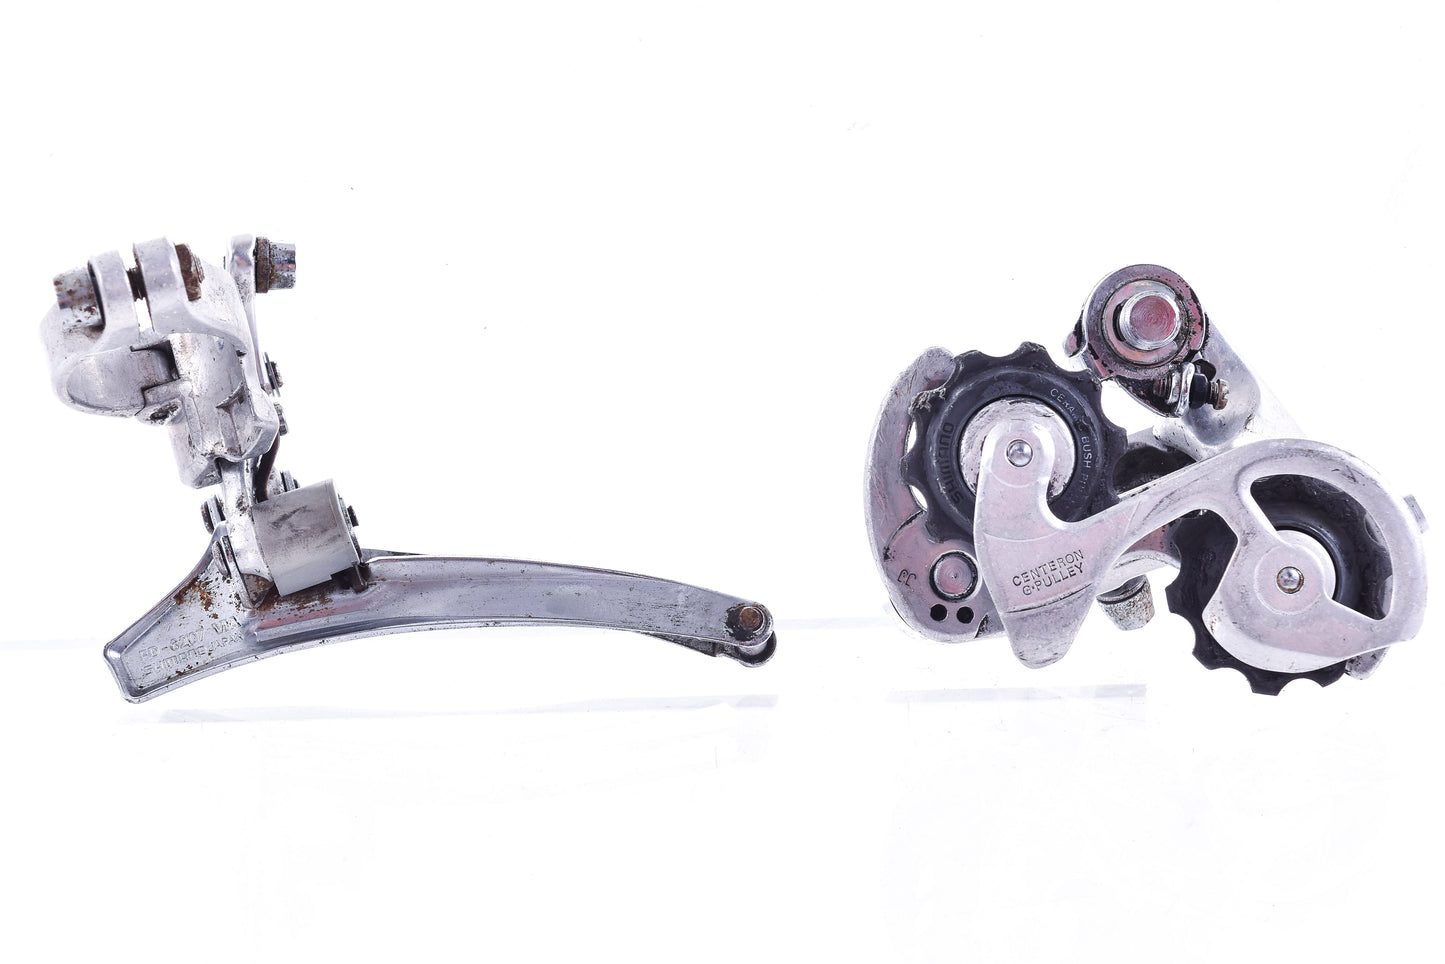 USED Vintage Shimano 600 Front and Rear Derailleur set 2x6 speed FD-6207 / RD-6208 Road Silver